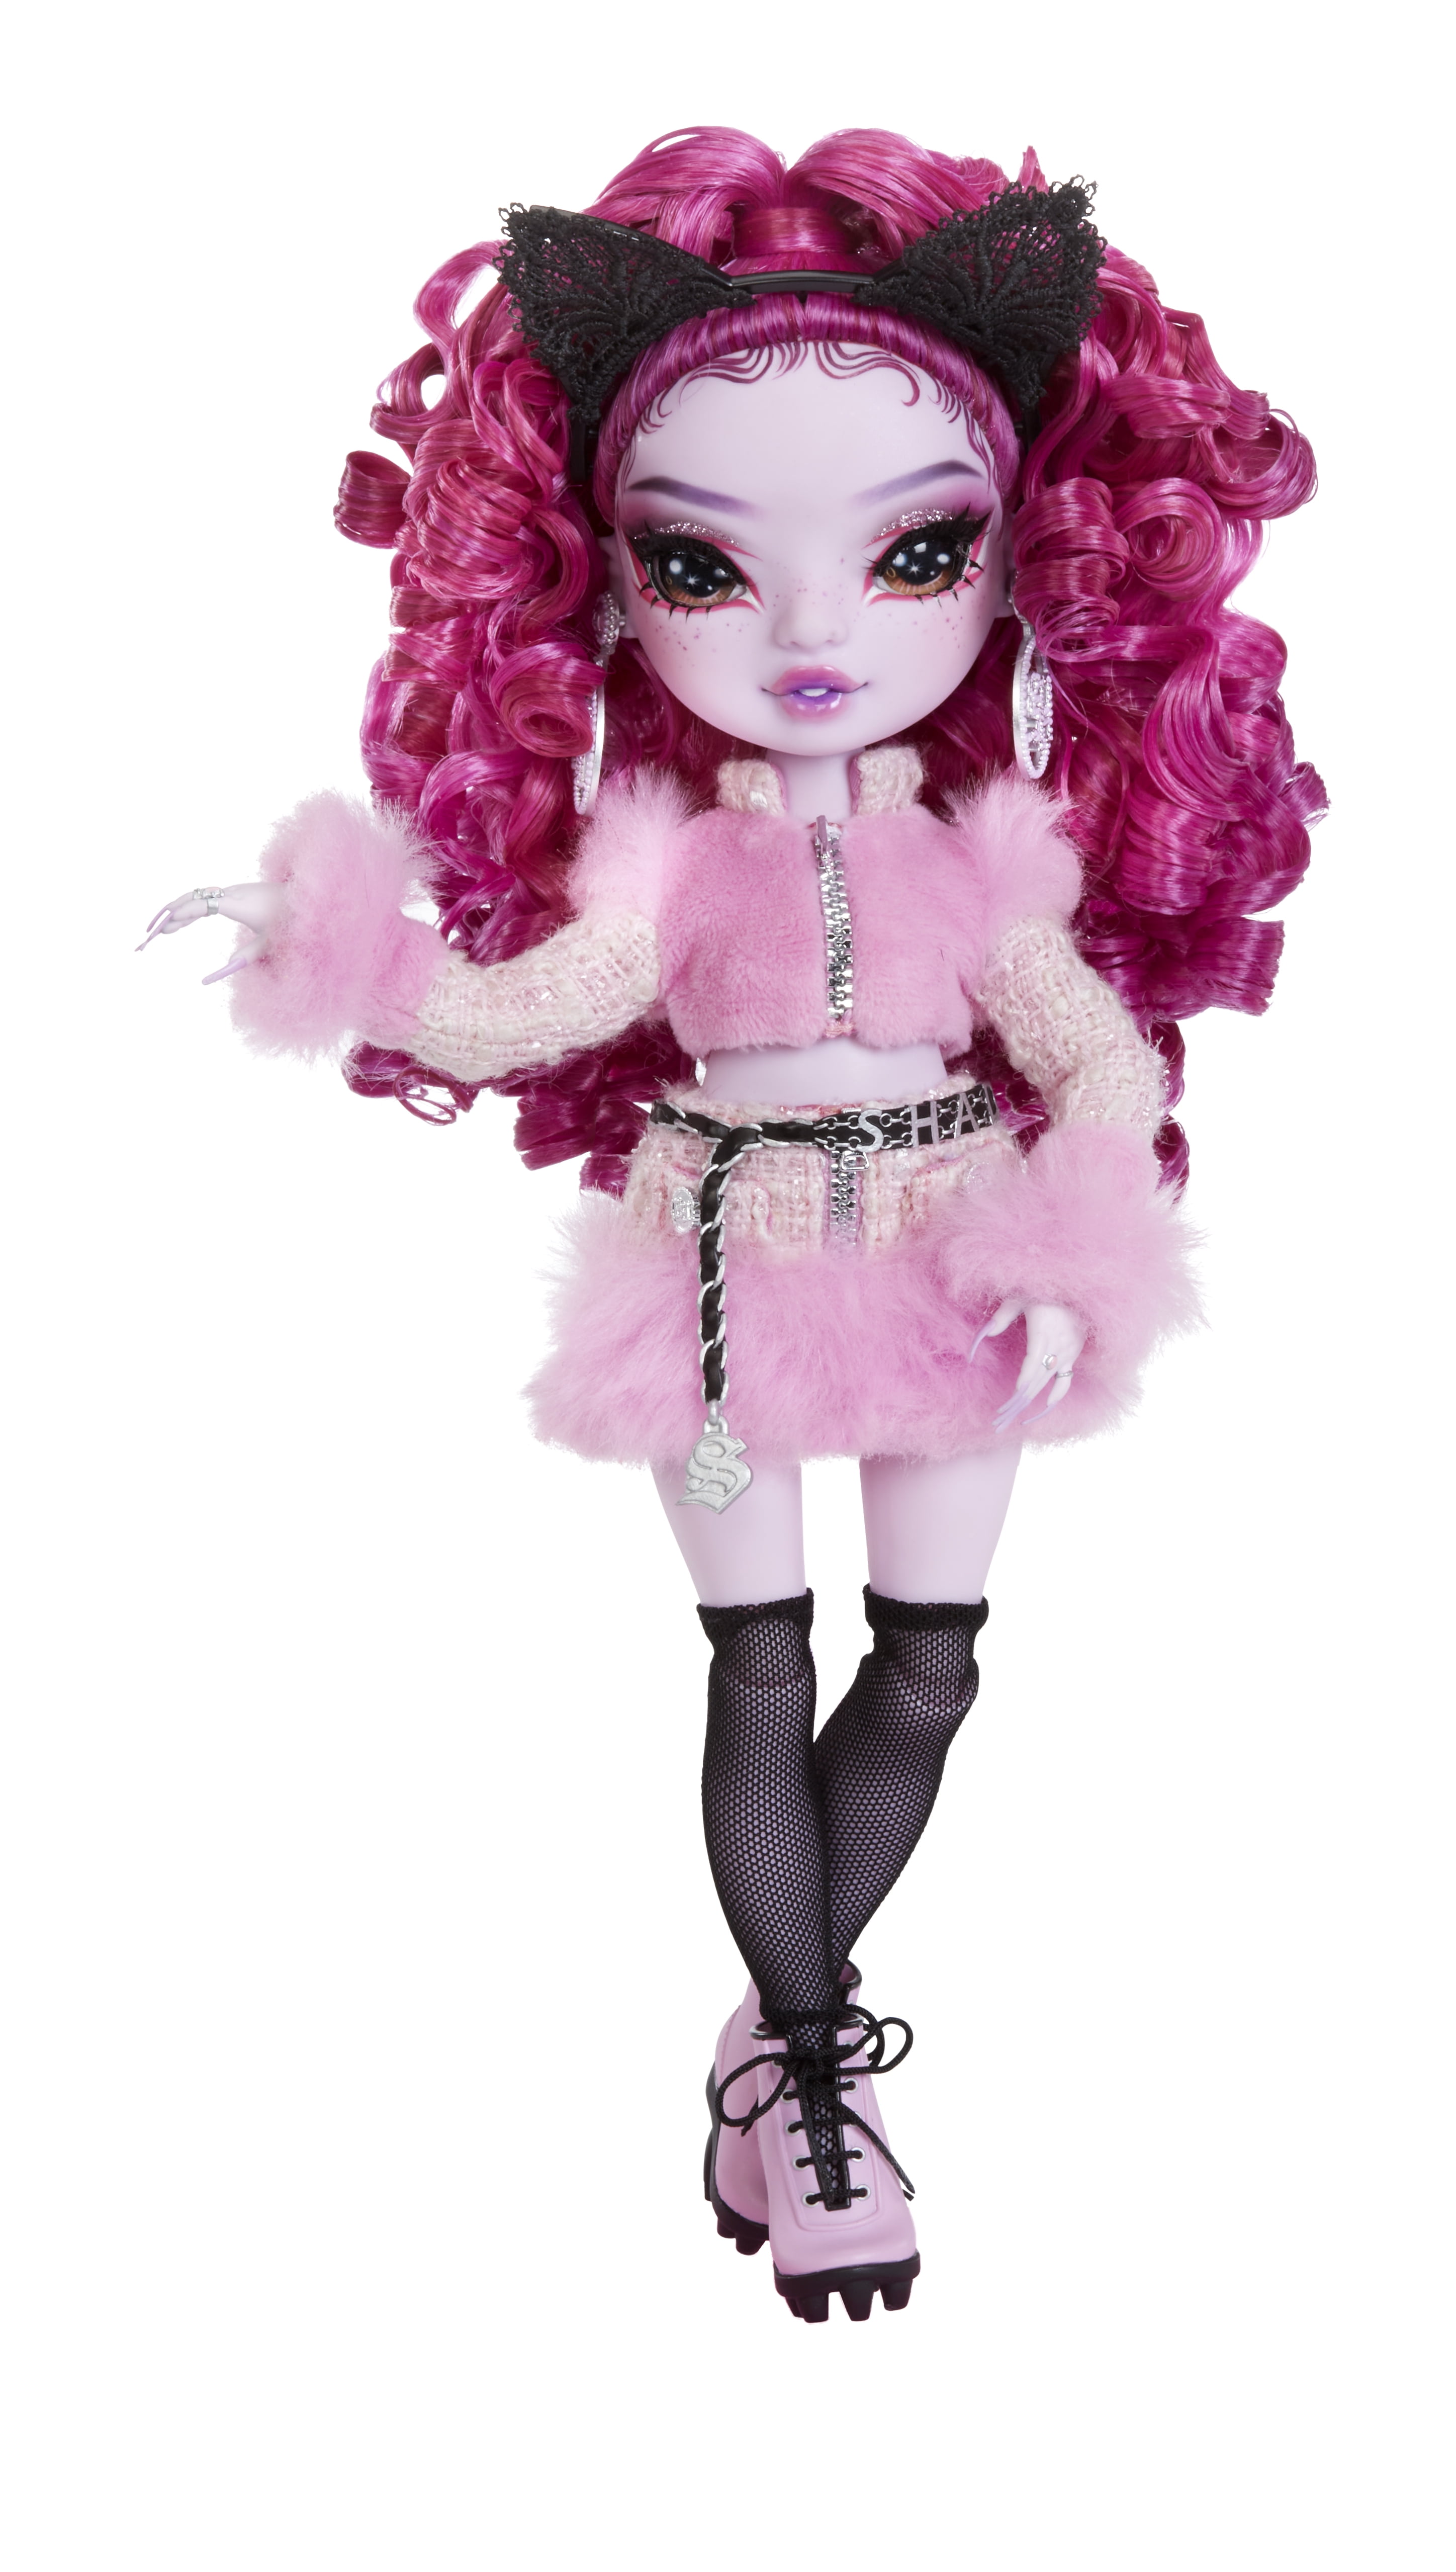 Rainbow Vision COSTUME BALL Shadow High  Lola Wilde (Pink) Fashion Doll. 11 inch Were-cat Themed Costume and Accessories. Toys for Kids, Great Gift for Kids 6-12 Years Old & Collectors